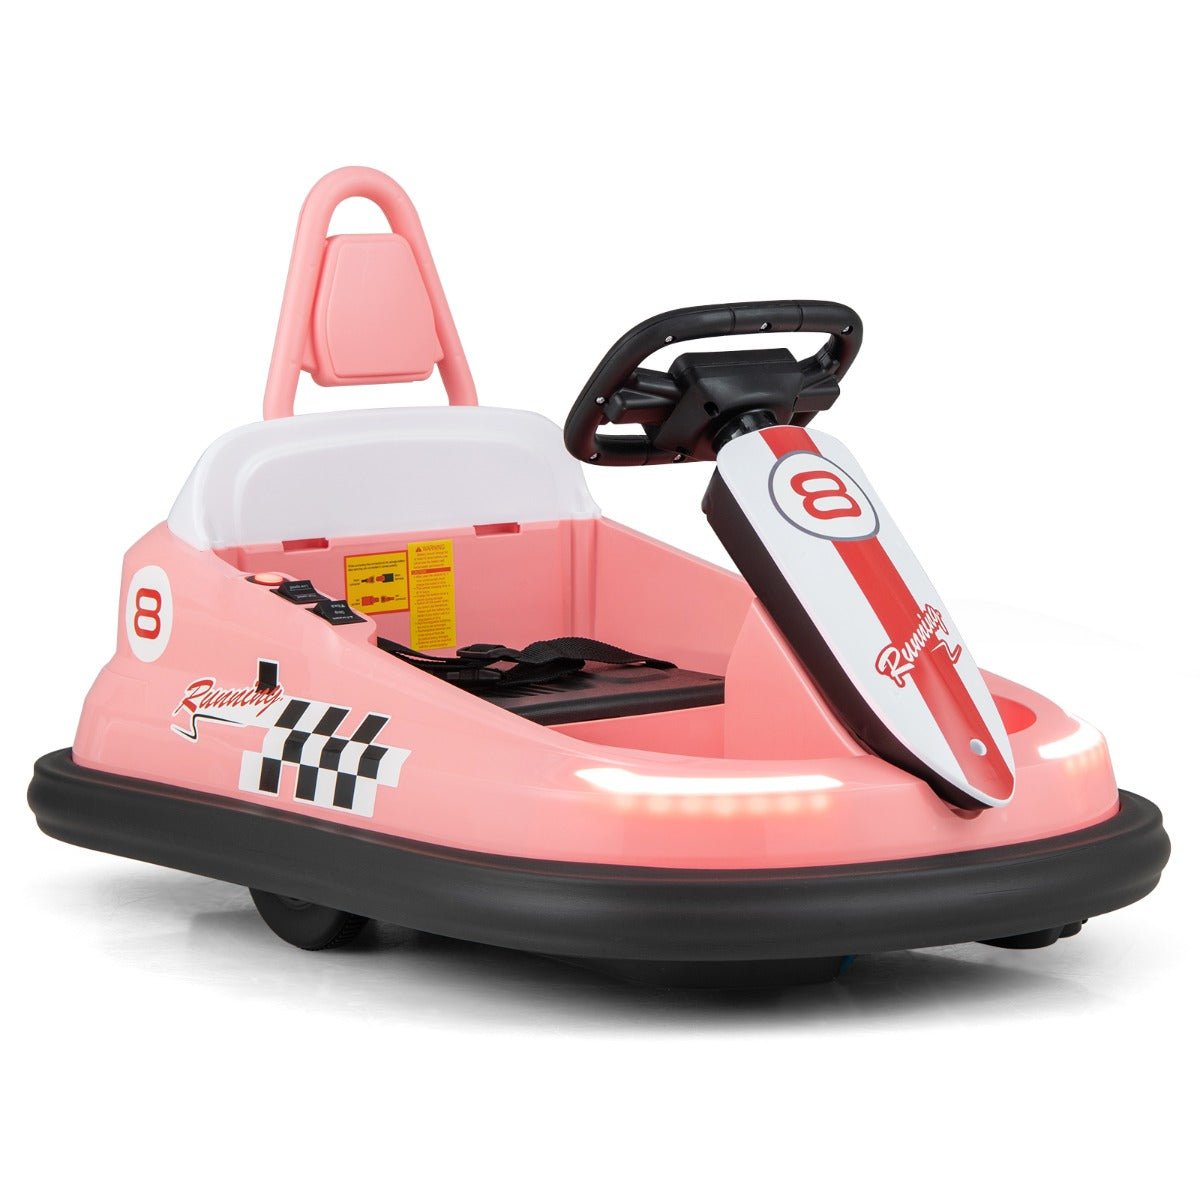 Electric Bumper Car in Pink: Spin Magic for Little Ones